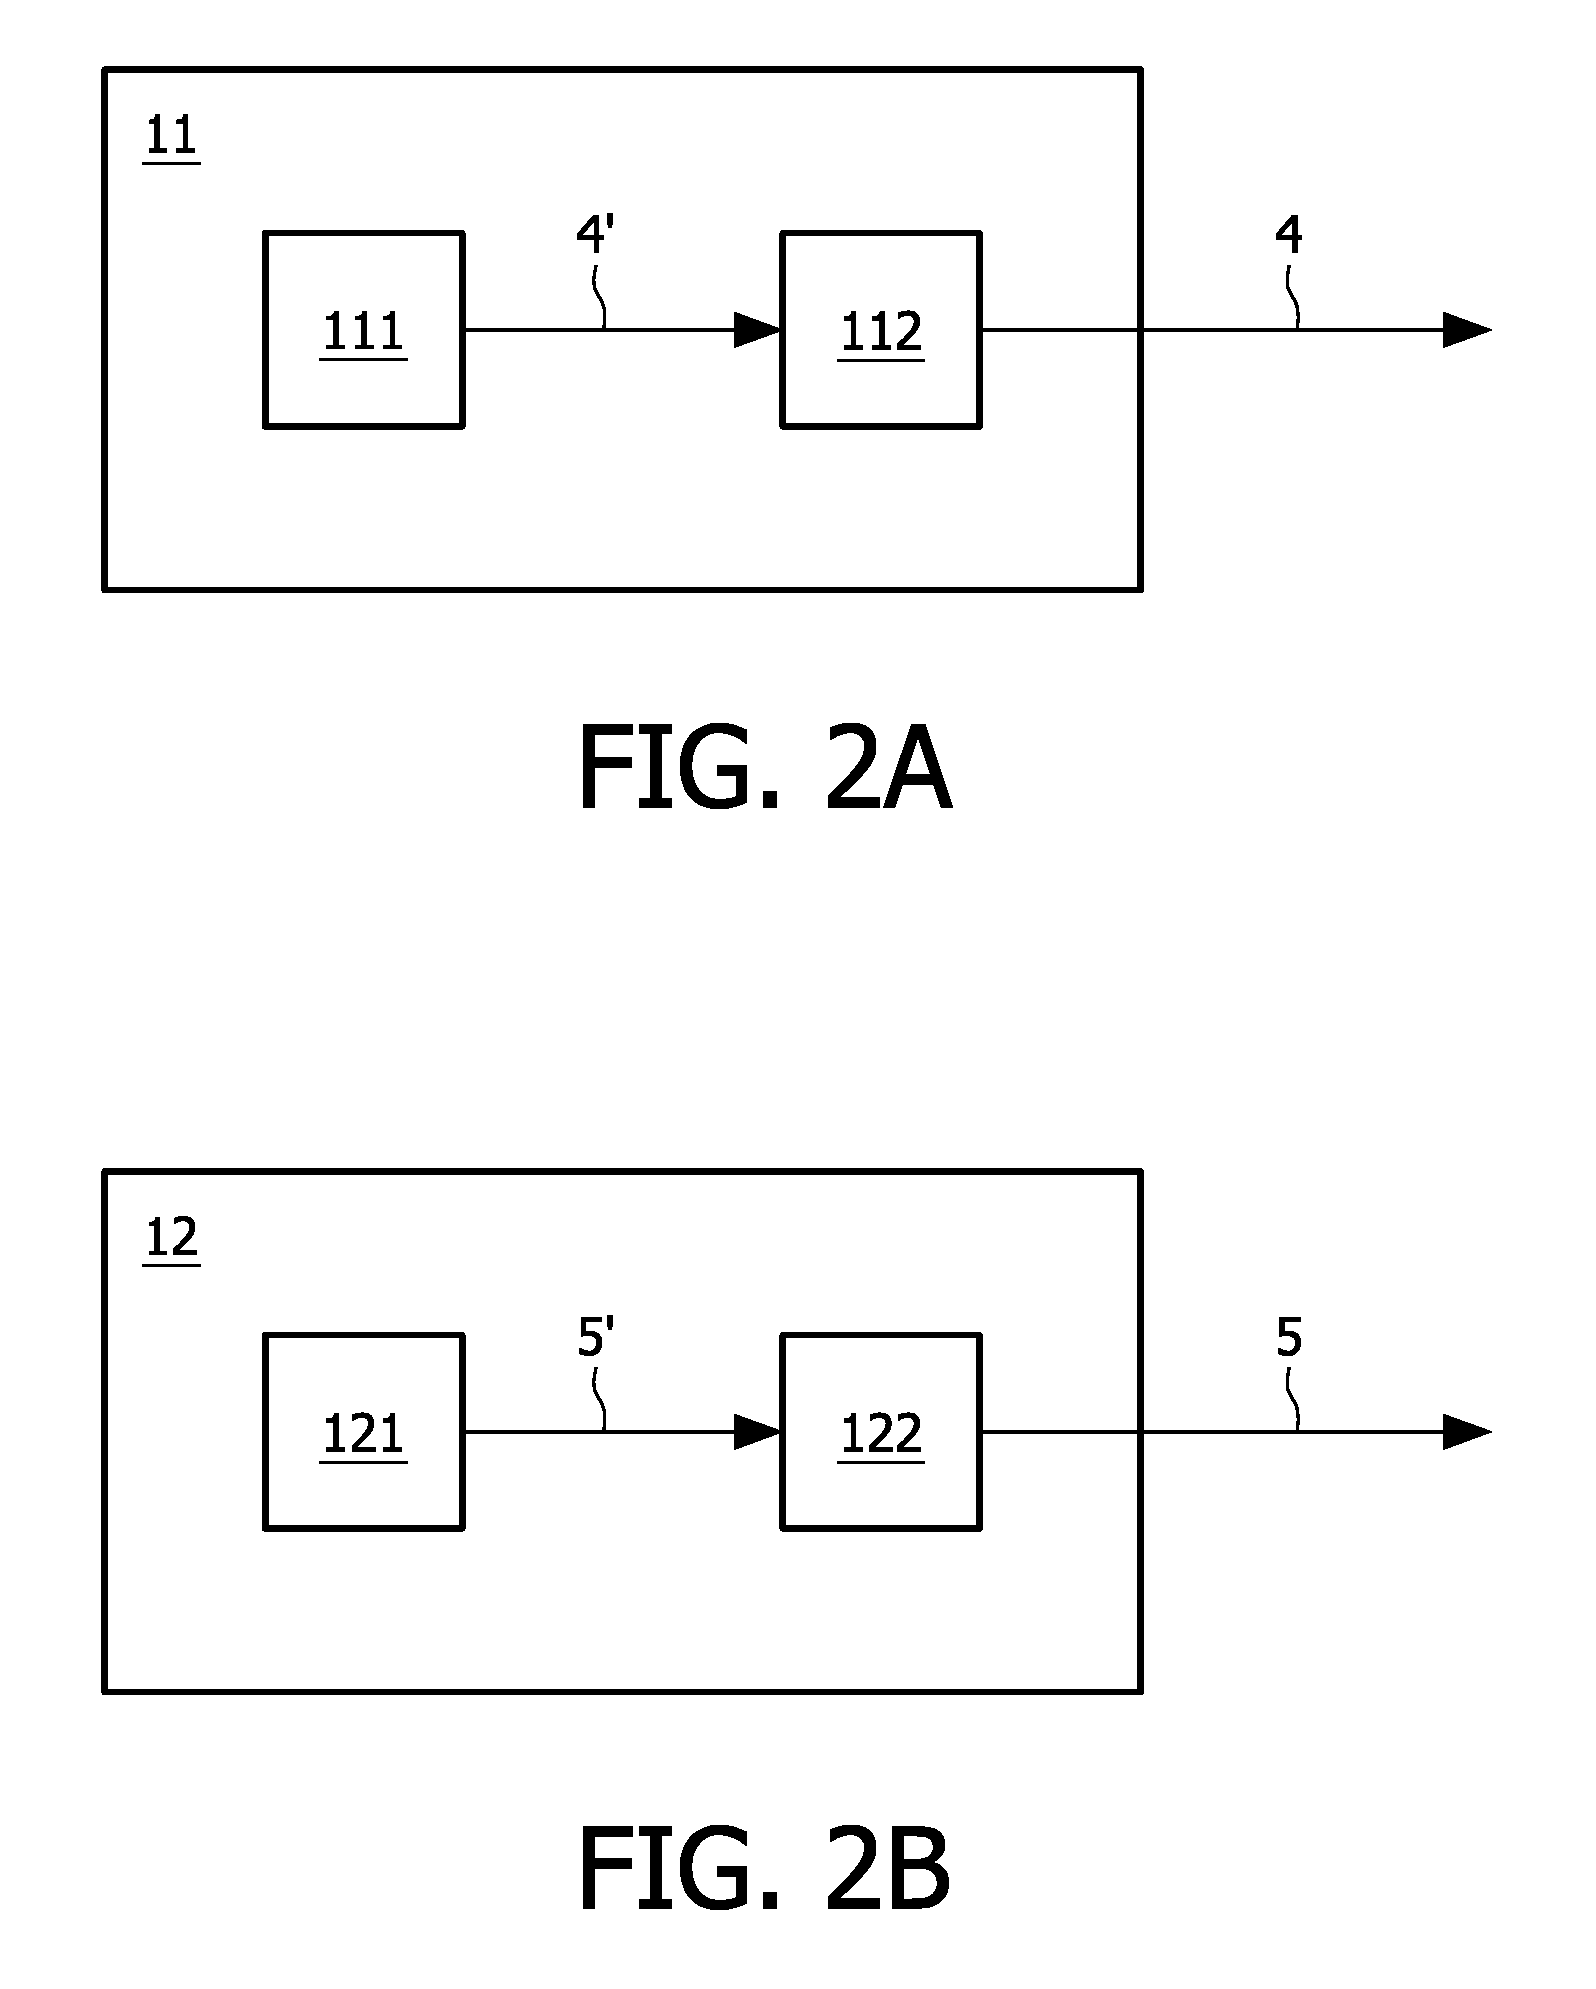 Controlling system for controlling an air handling system